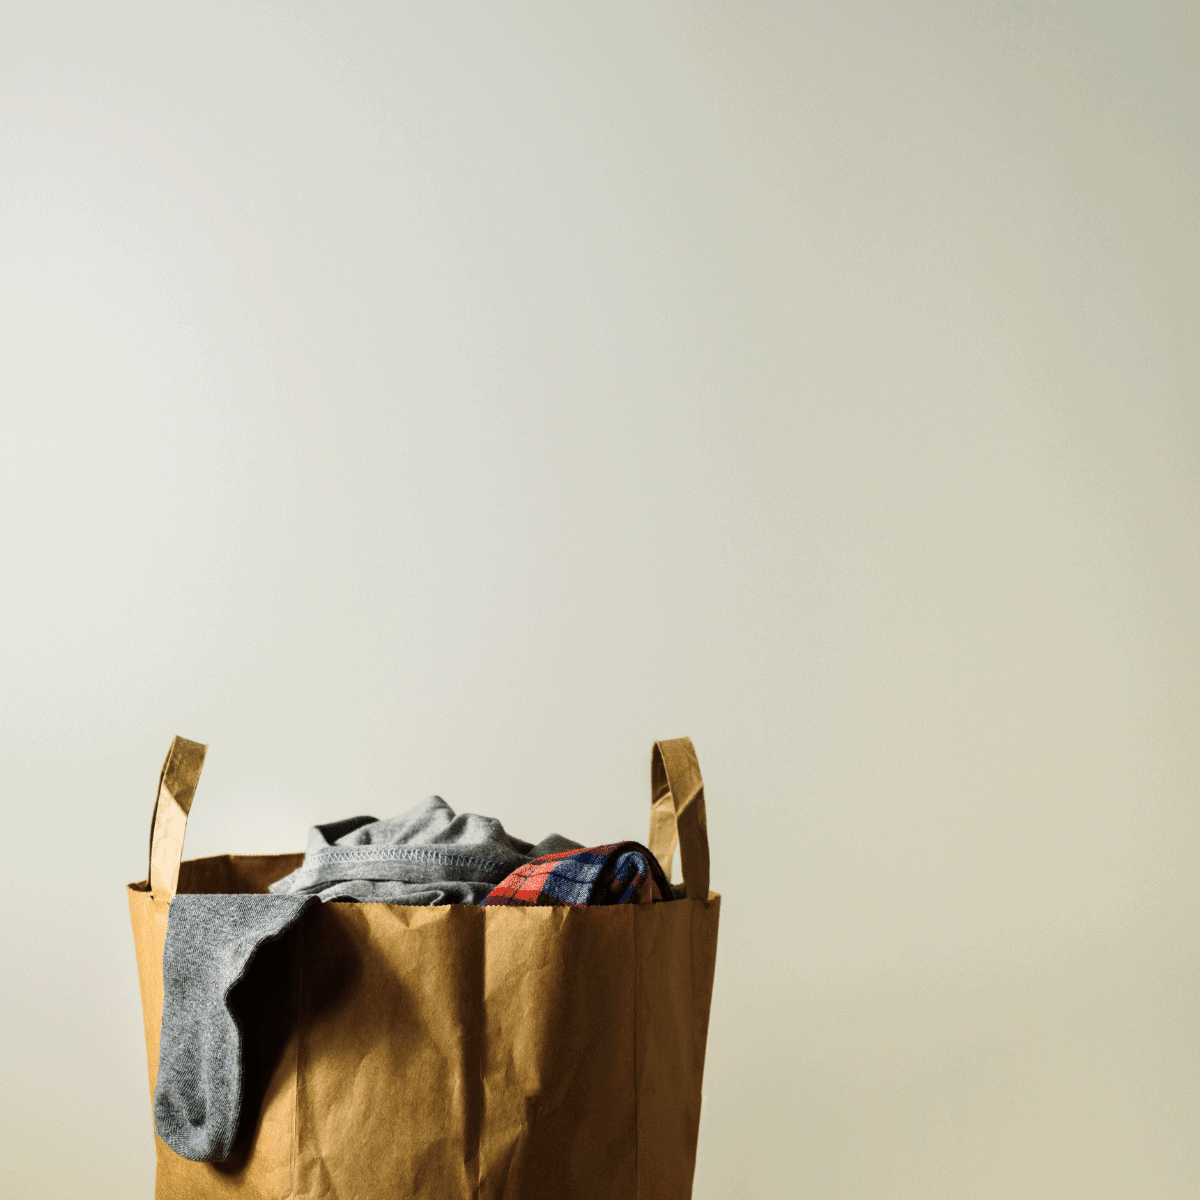 paper grocery sack overflowing with clothes against a white wall